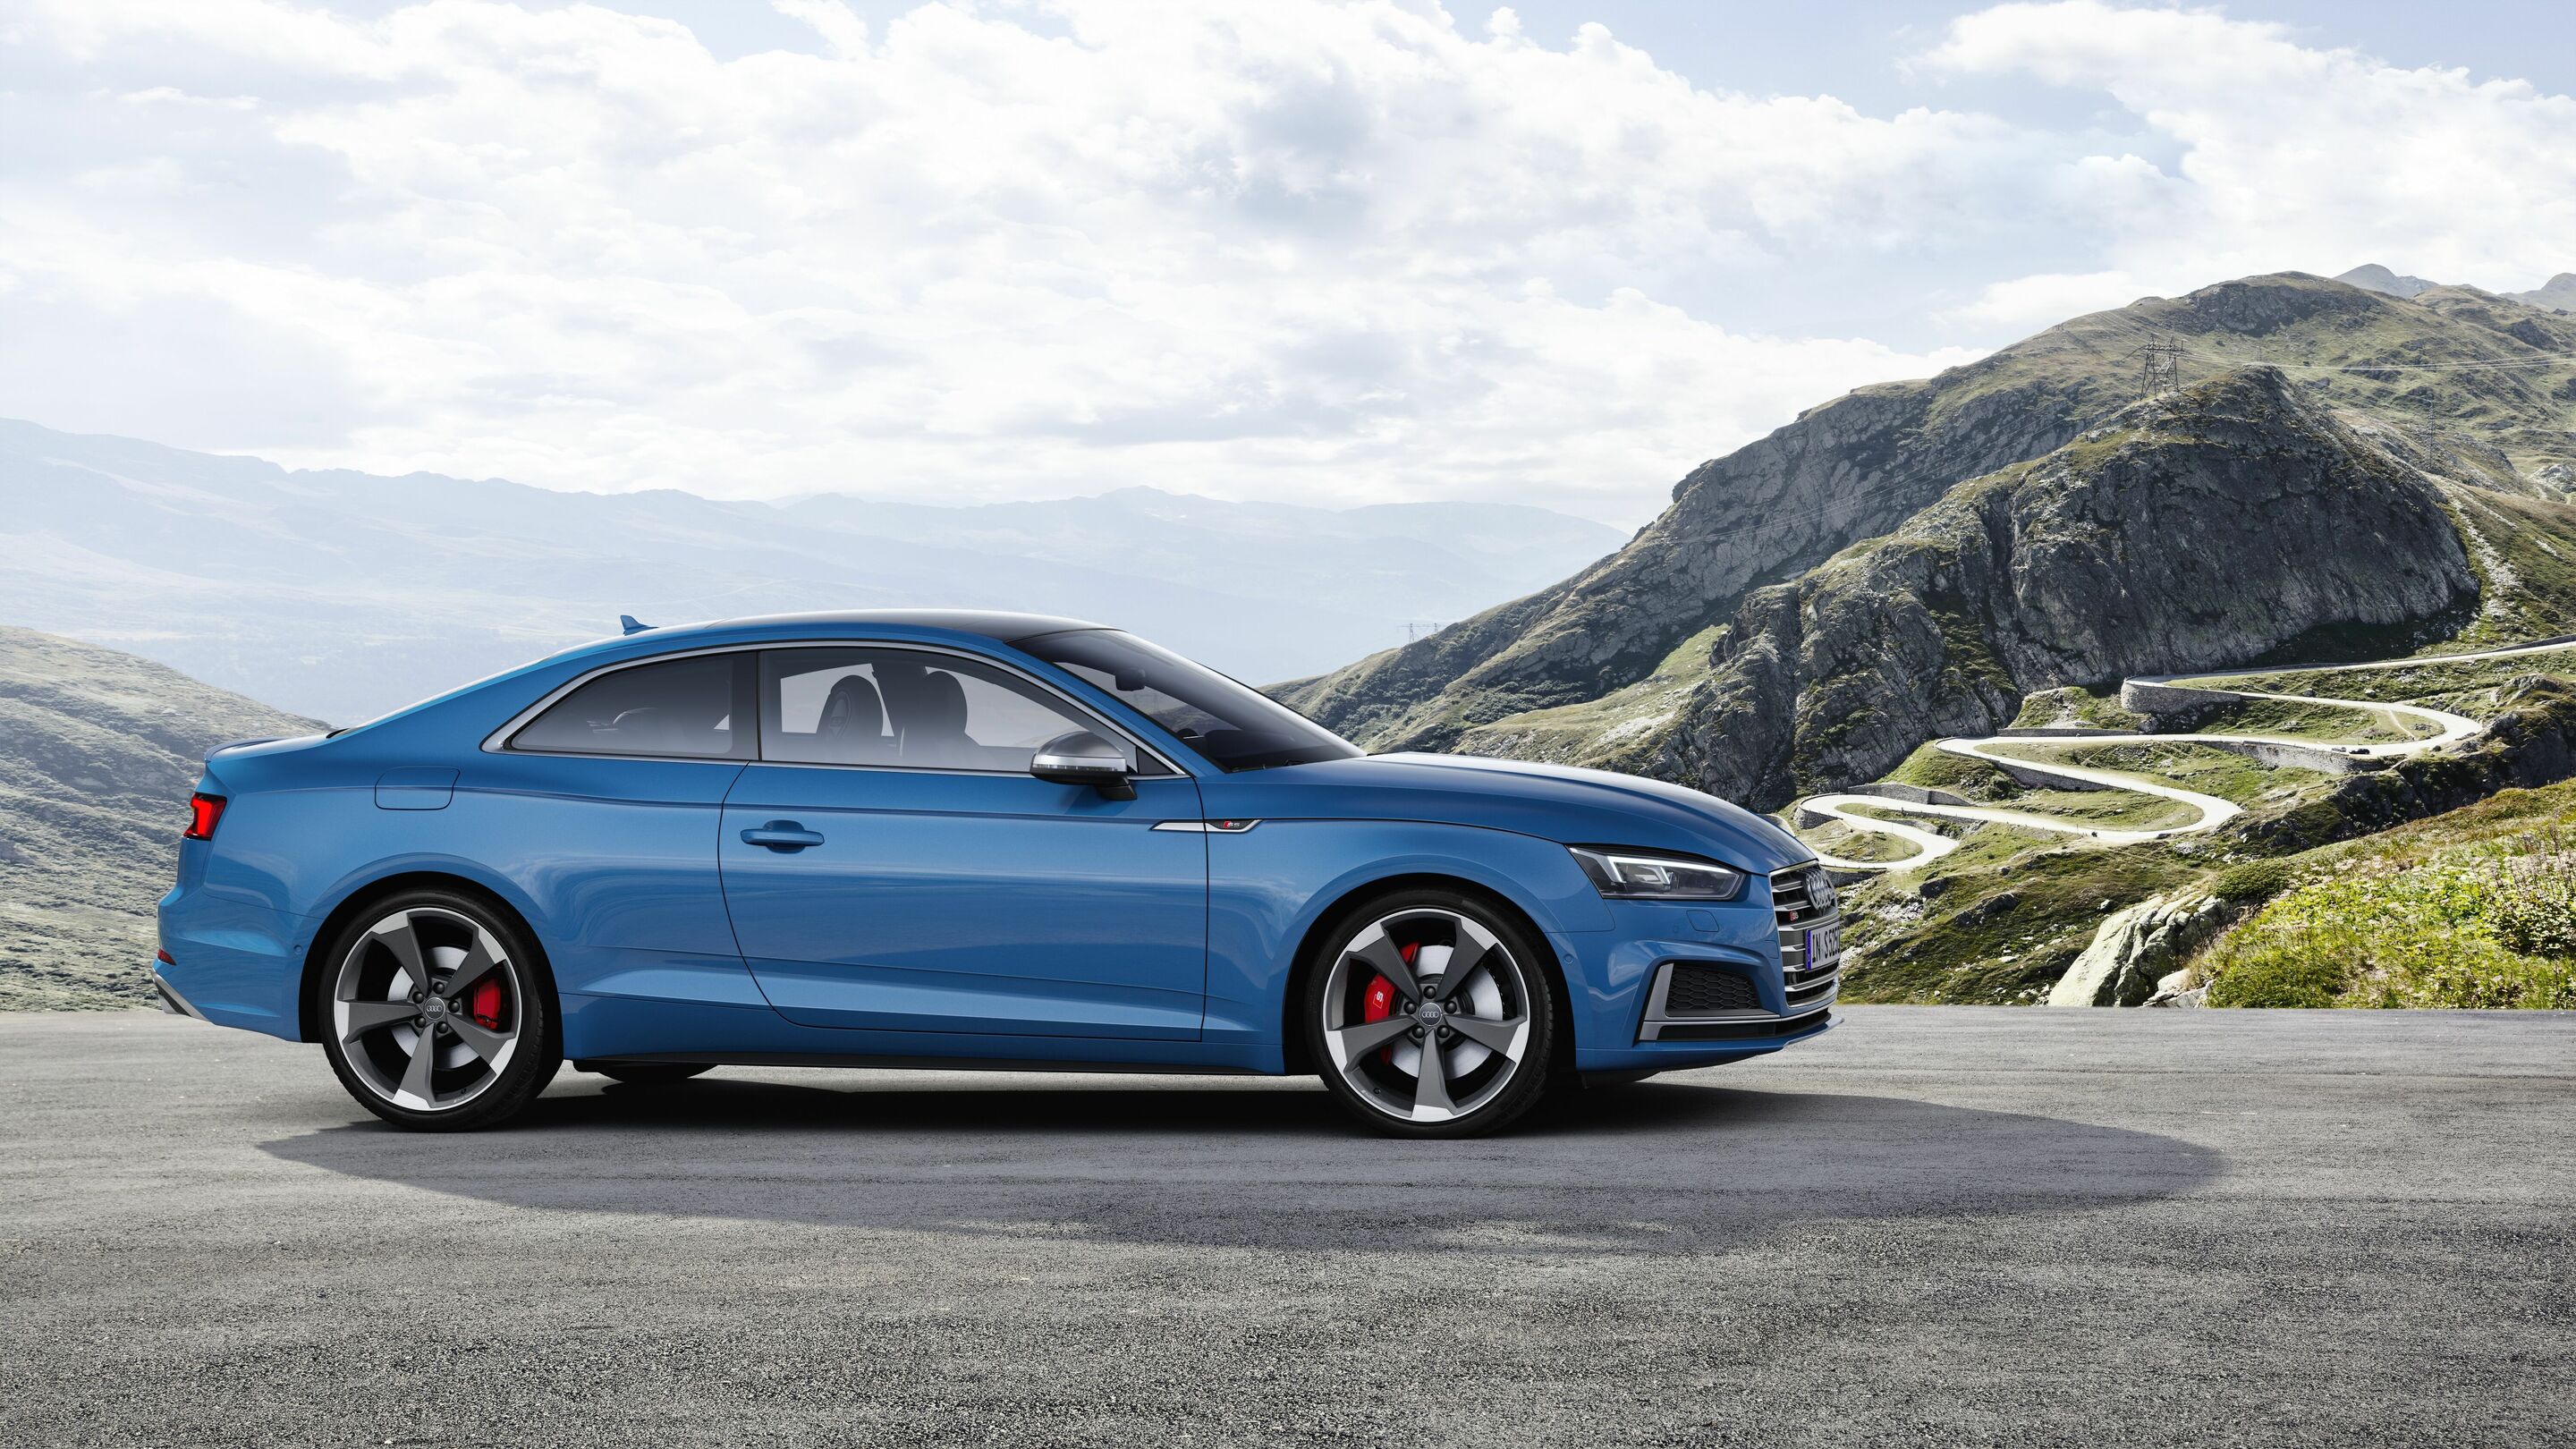 The Audi S5 models now with a TDI engine